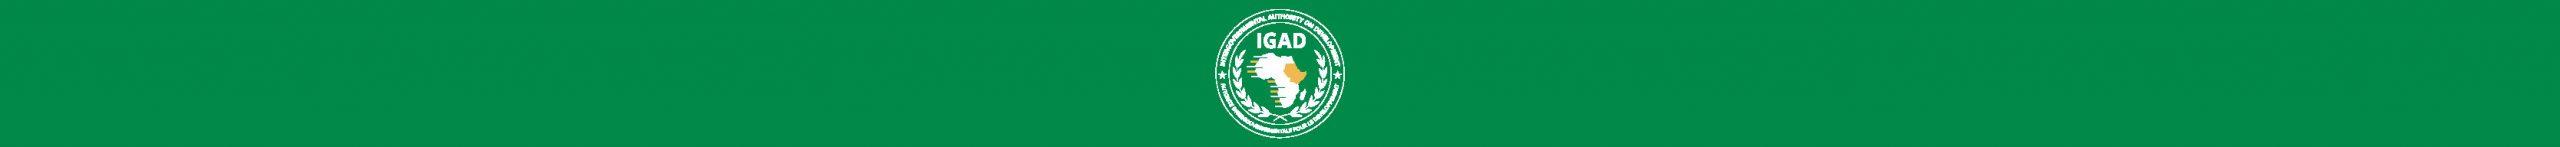 Construction of the New IGAD Headquarter Building Project